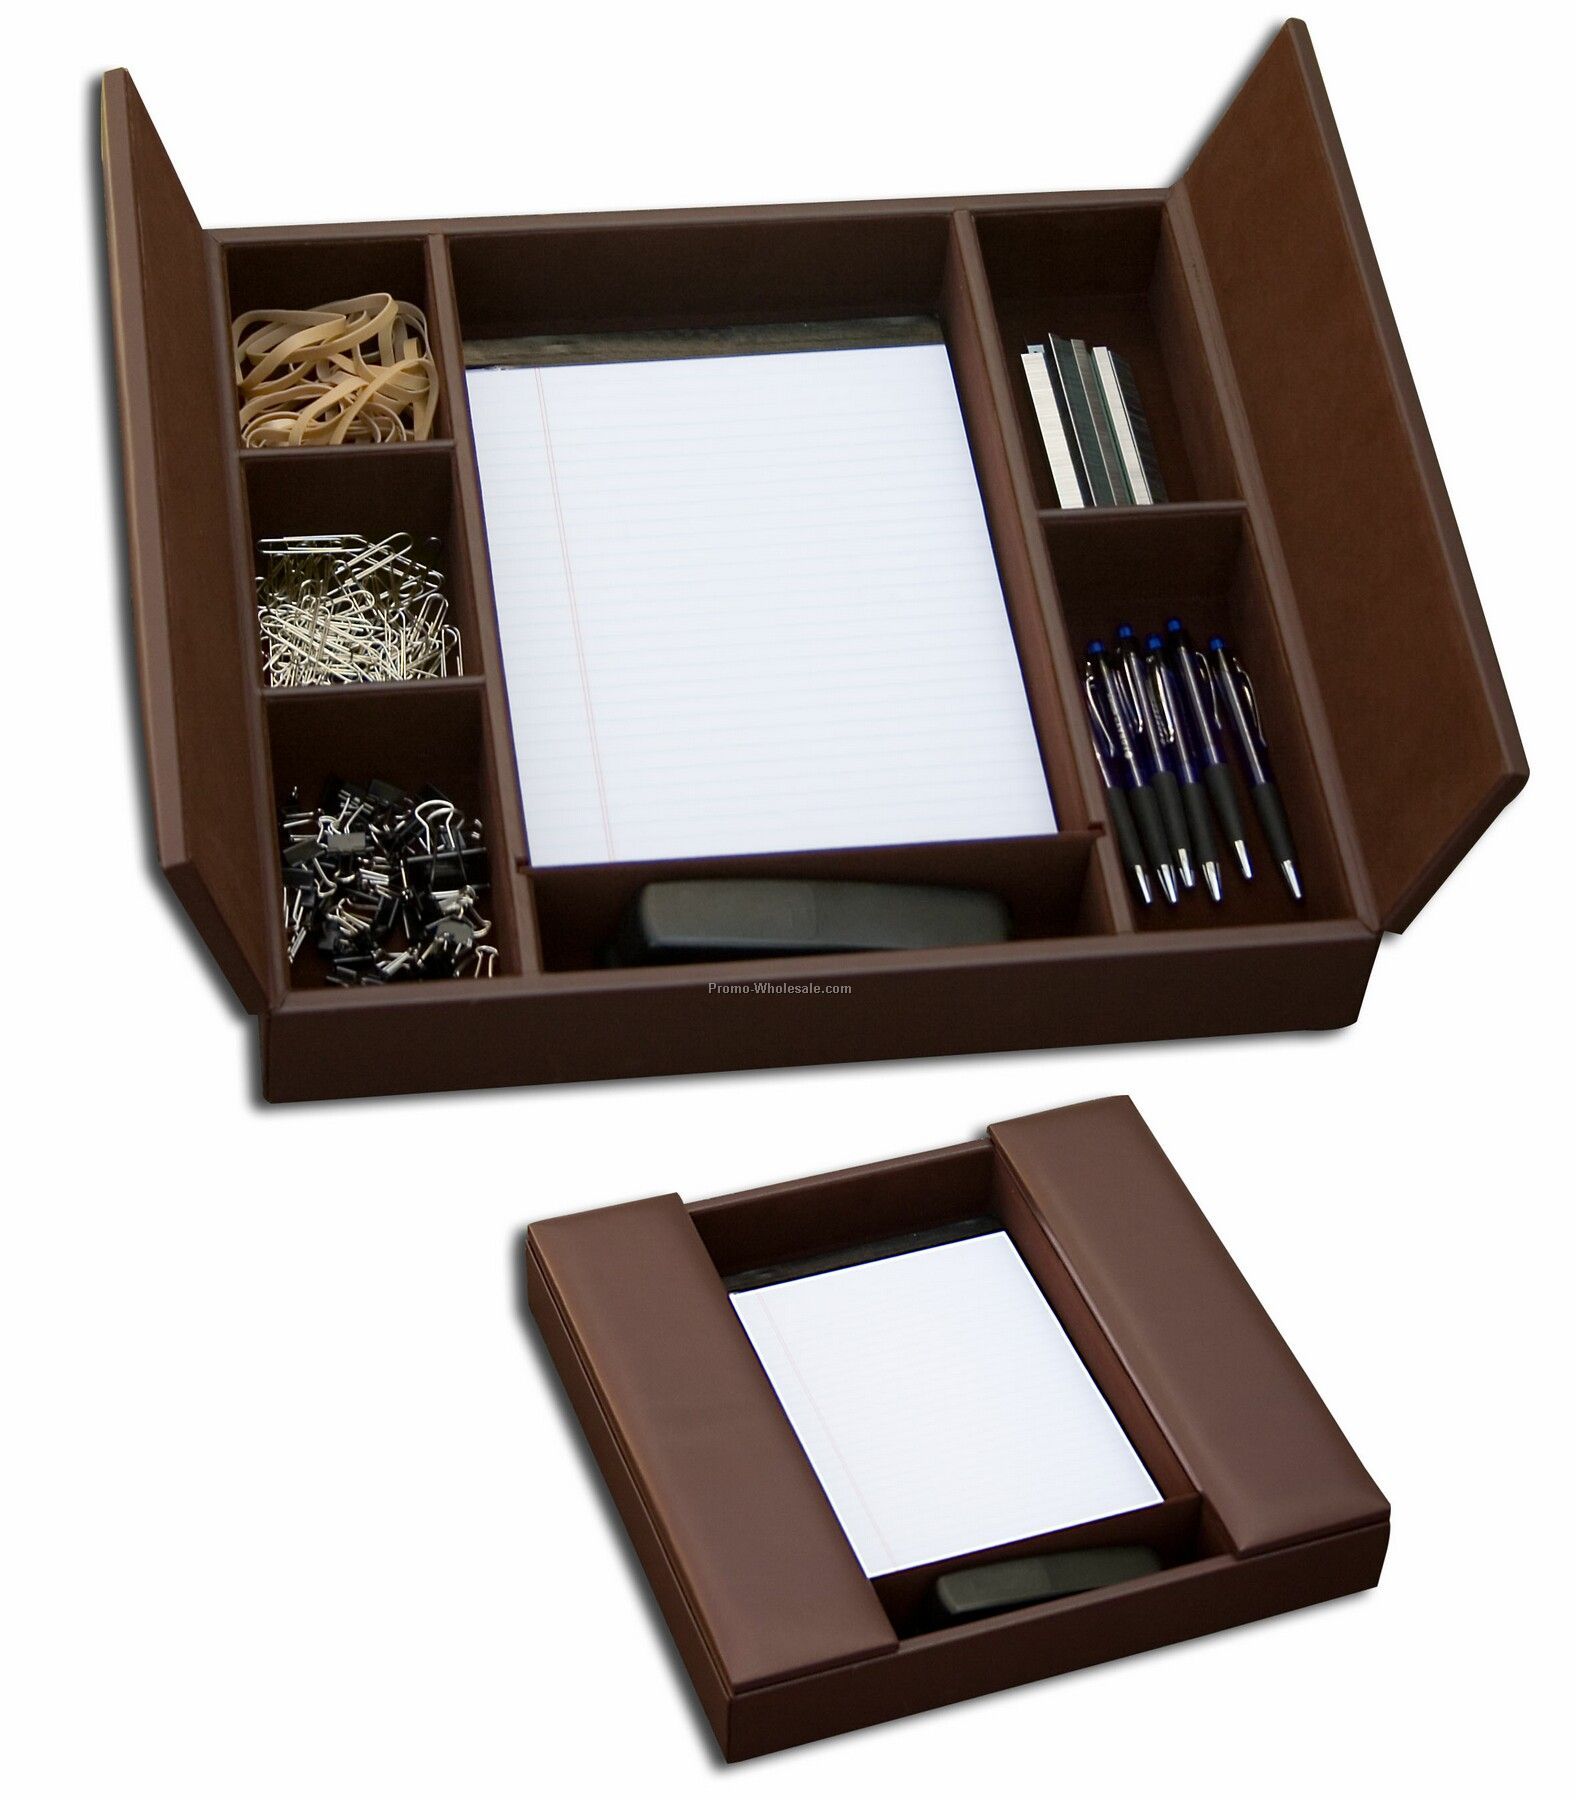 Conference Room Organizer - Black Top Grain Leather